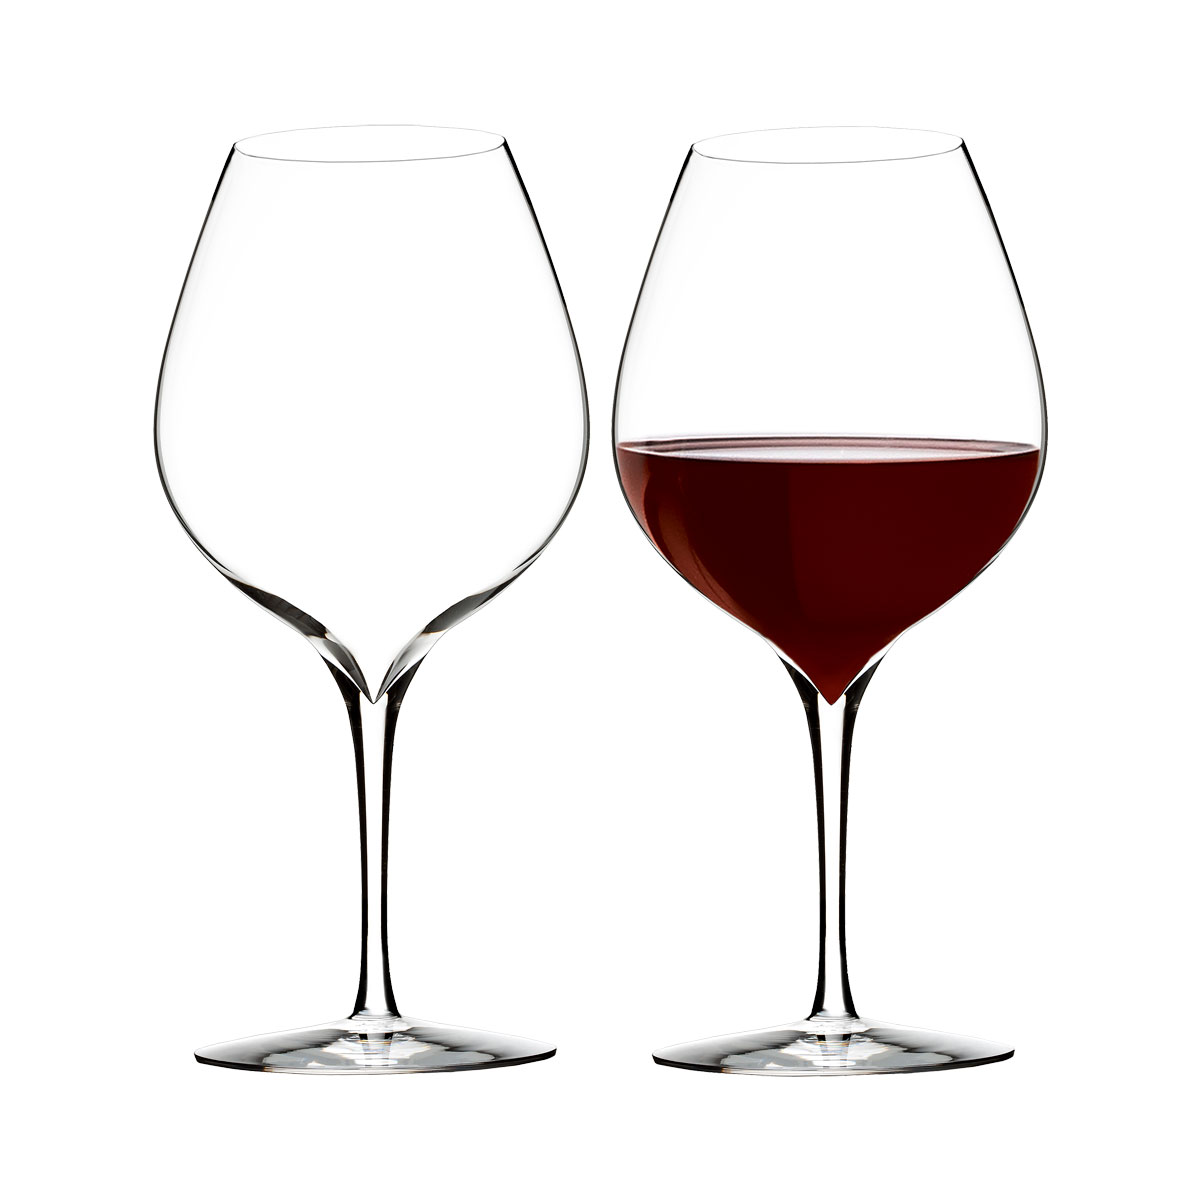 Classic Crystal Clear Stemmed Red Wine Glass, Merlot Cabernet Sauvignon Pinot Noir, Set of 4, 12 oz